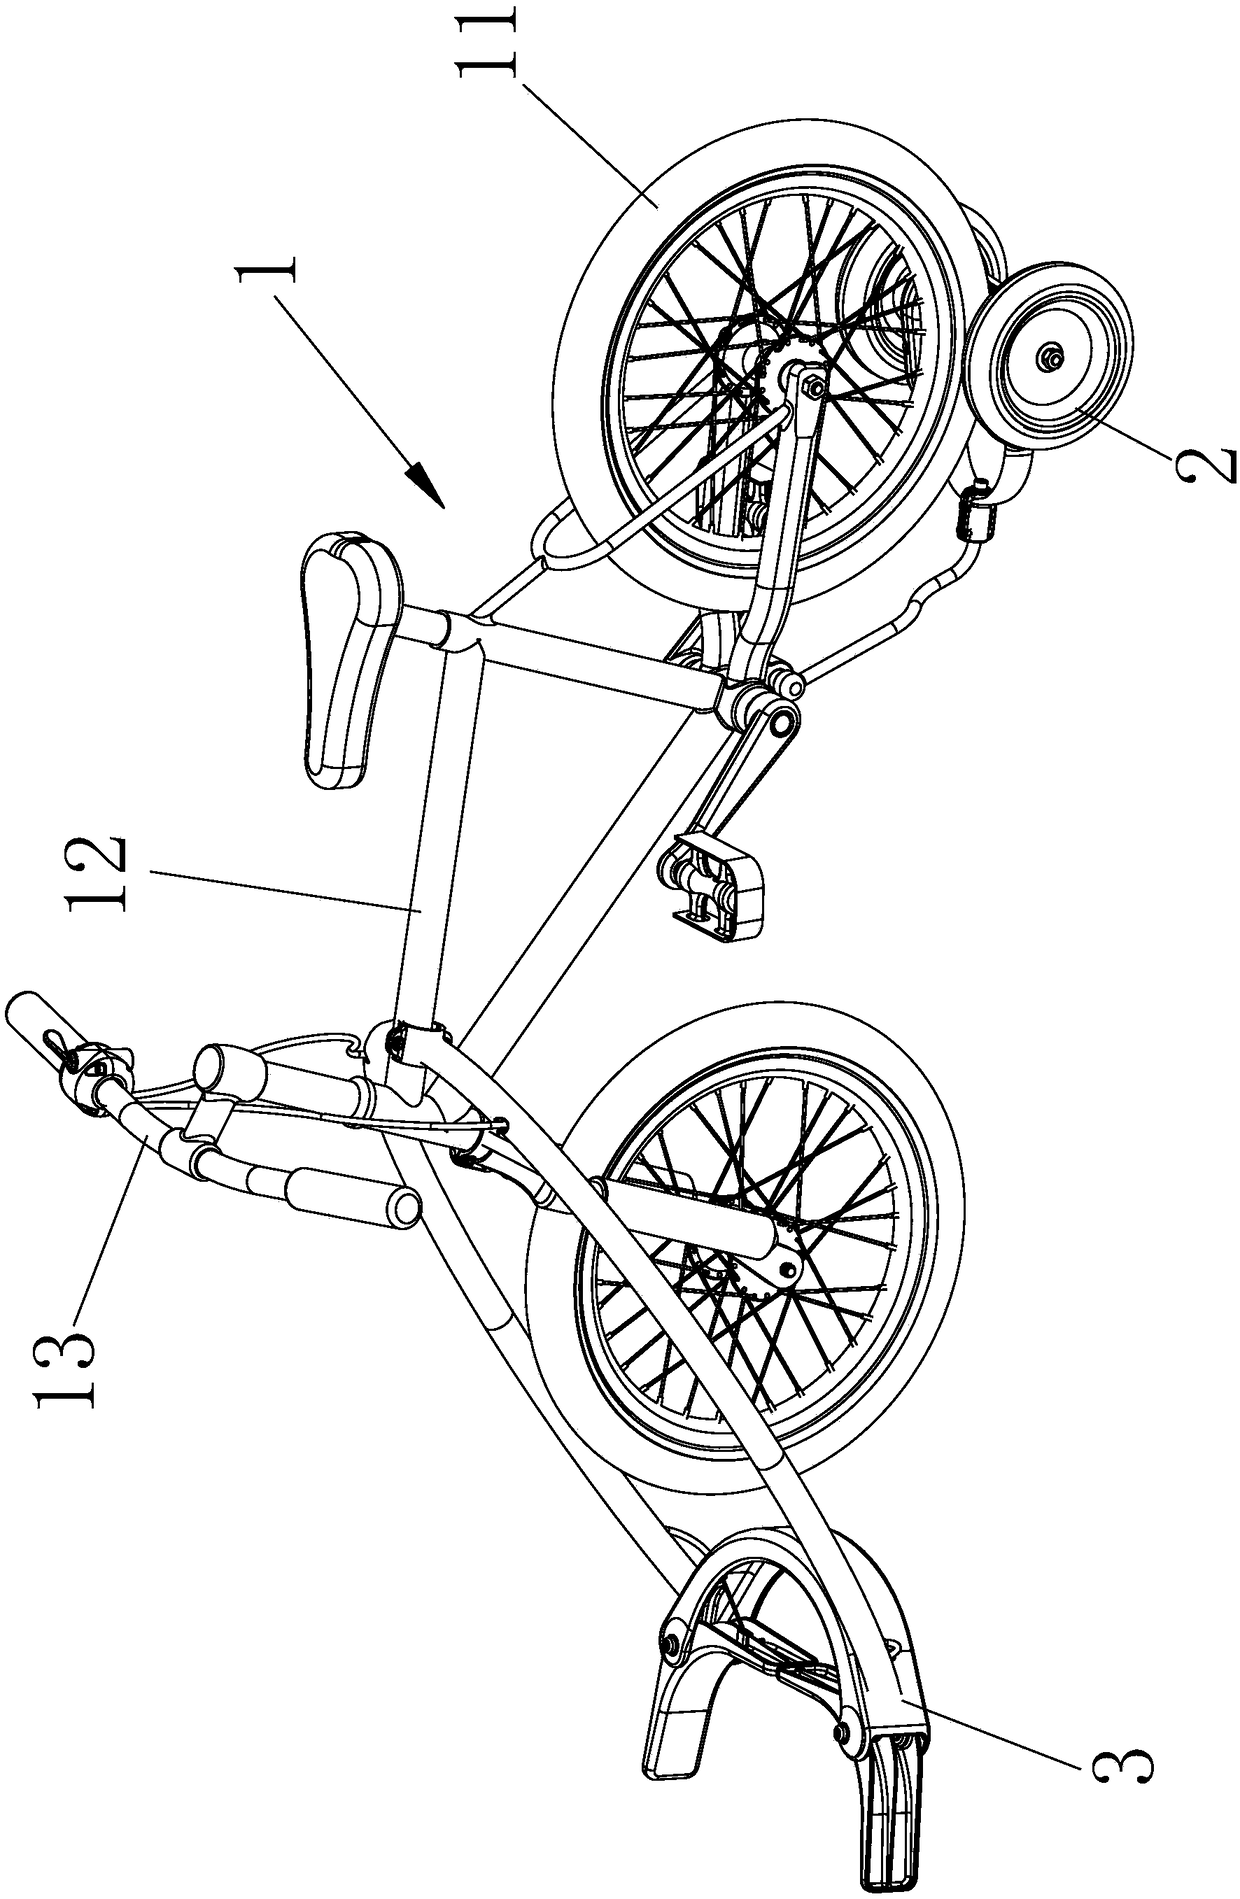 Single-roller and double-wheel bicycle game device